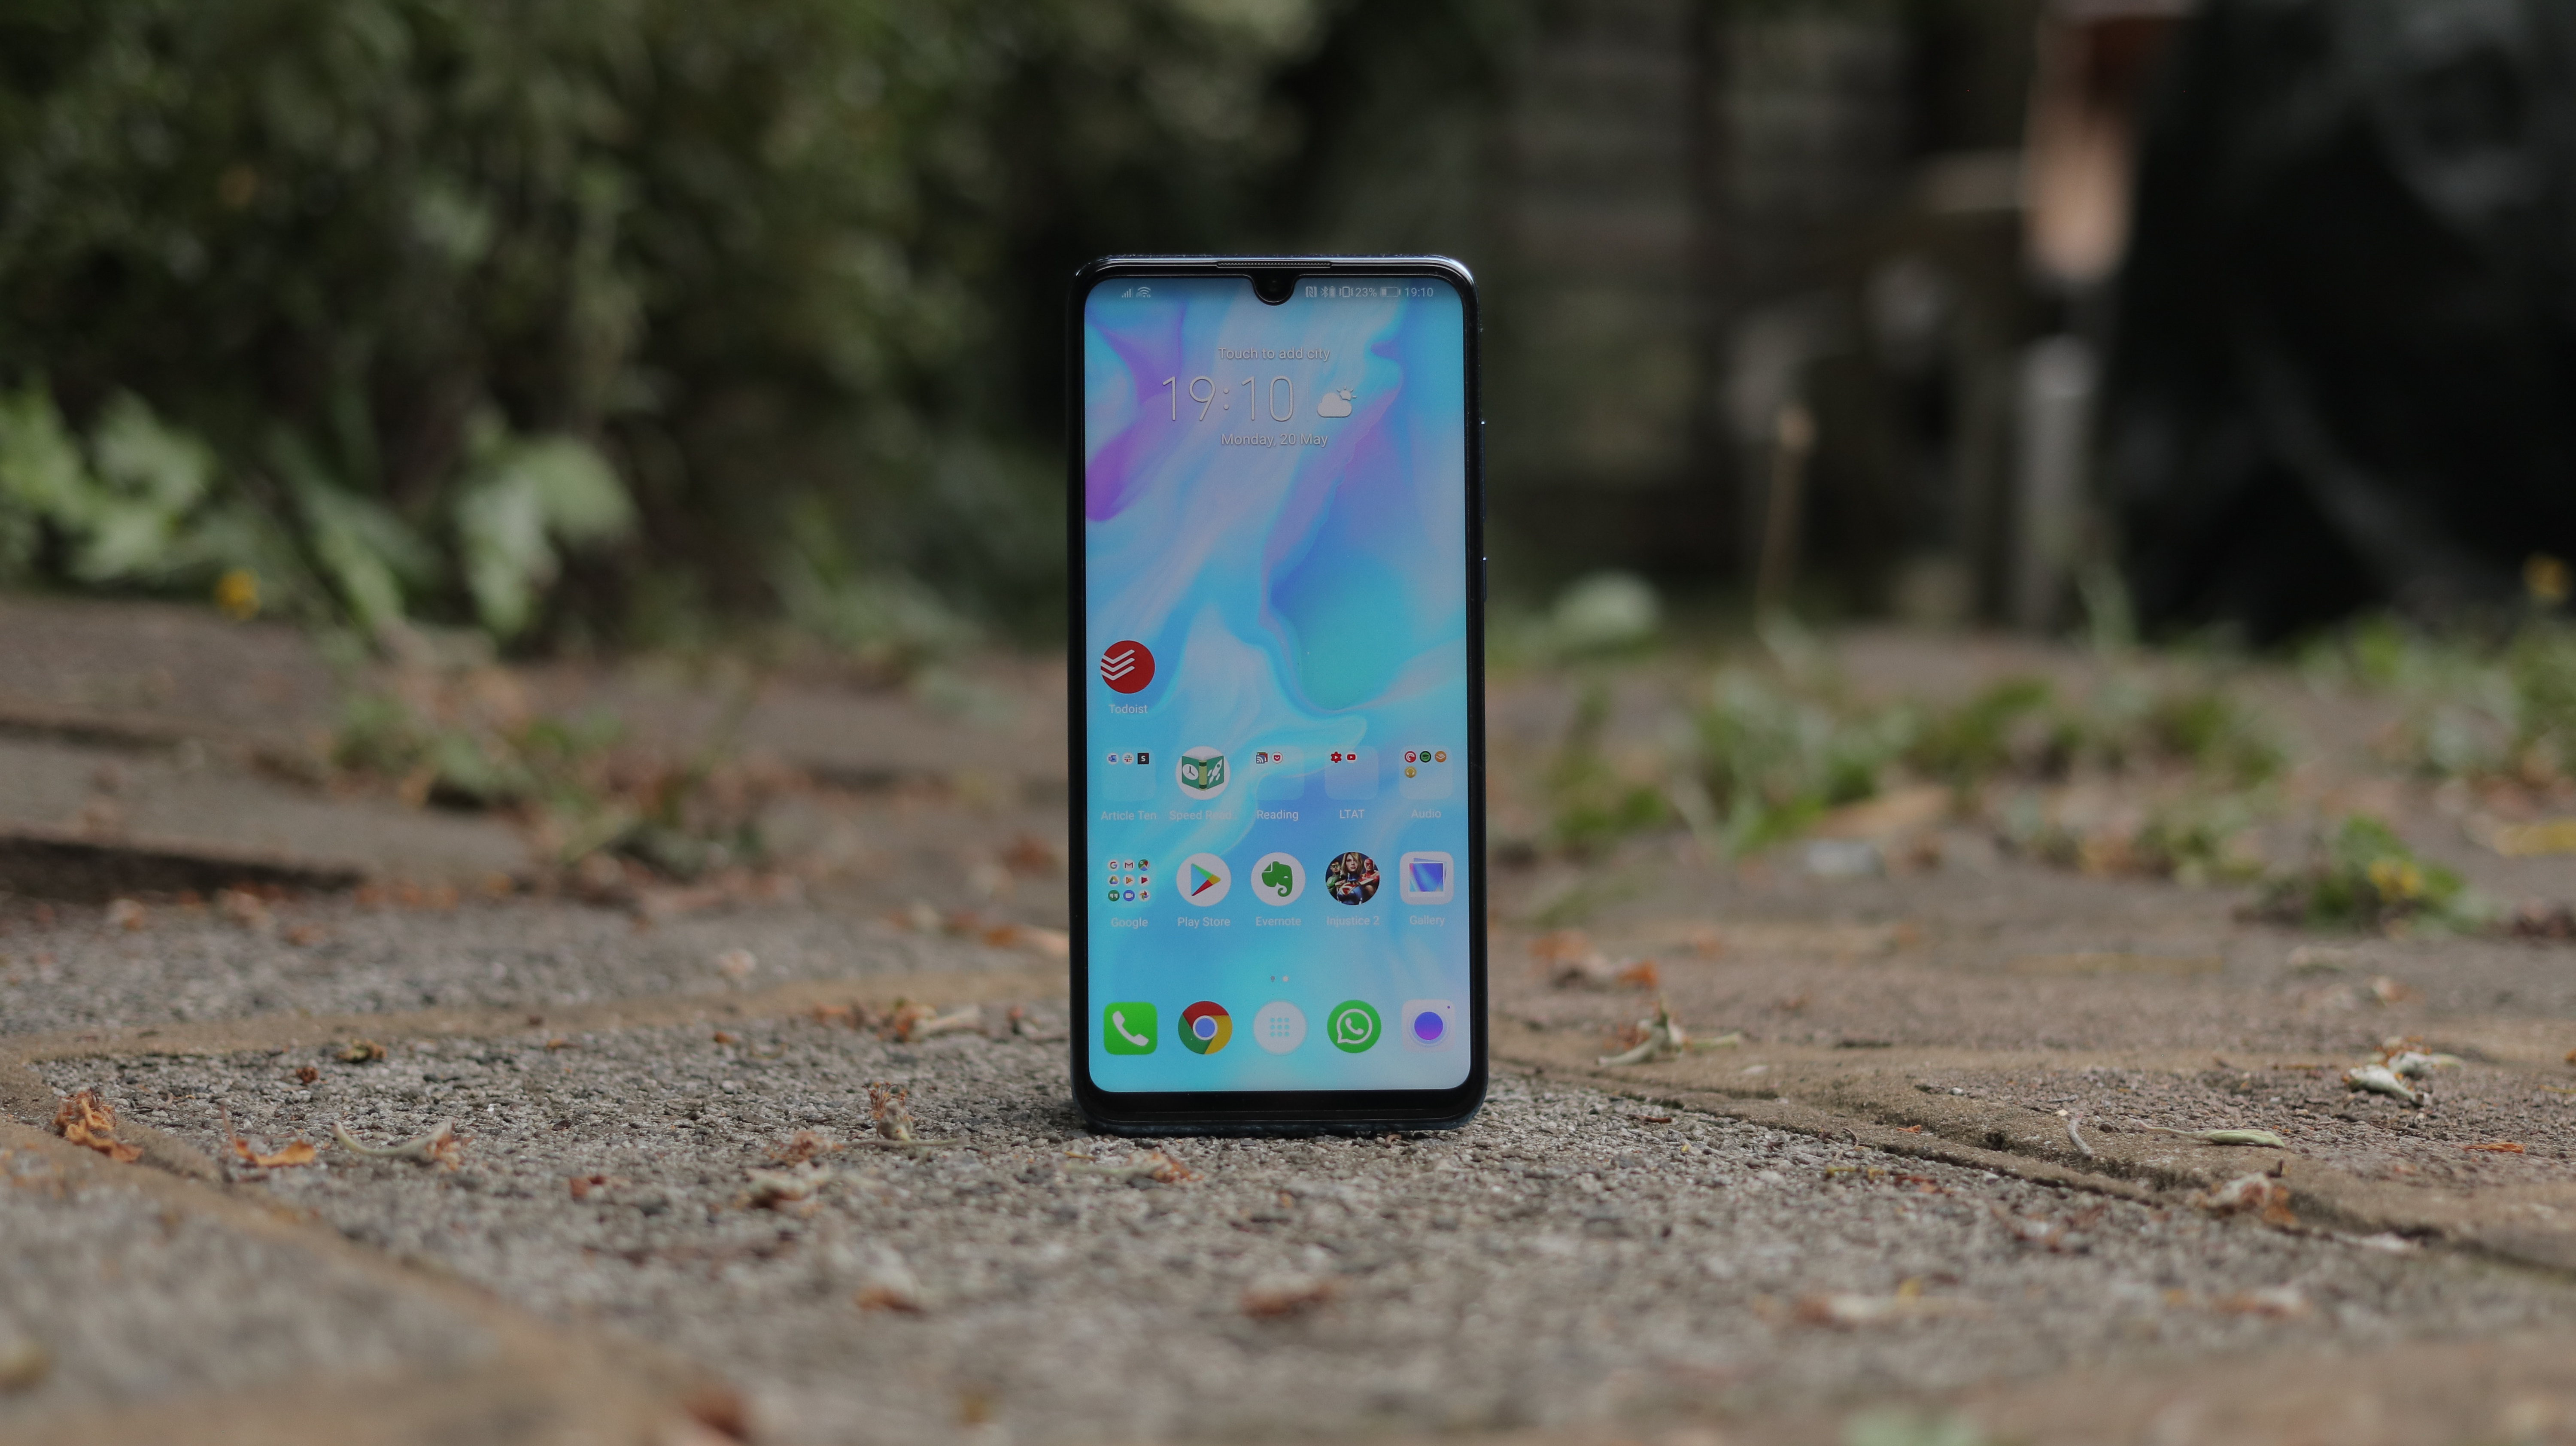 Huawei P30 Lite review: Attractive and affordable, with excellent